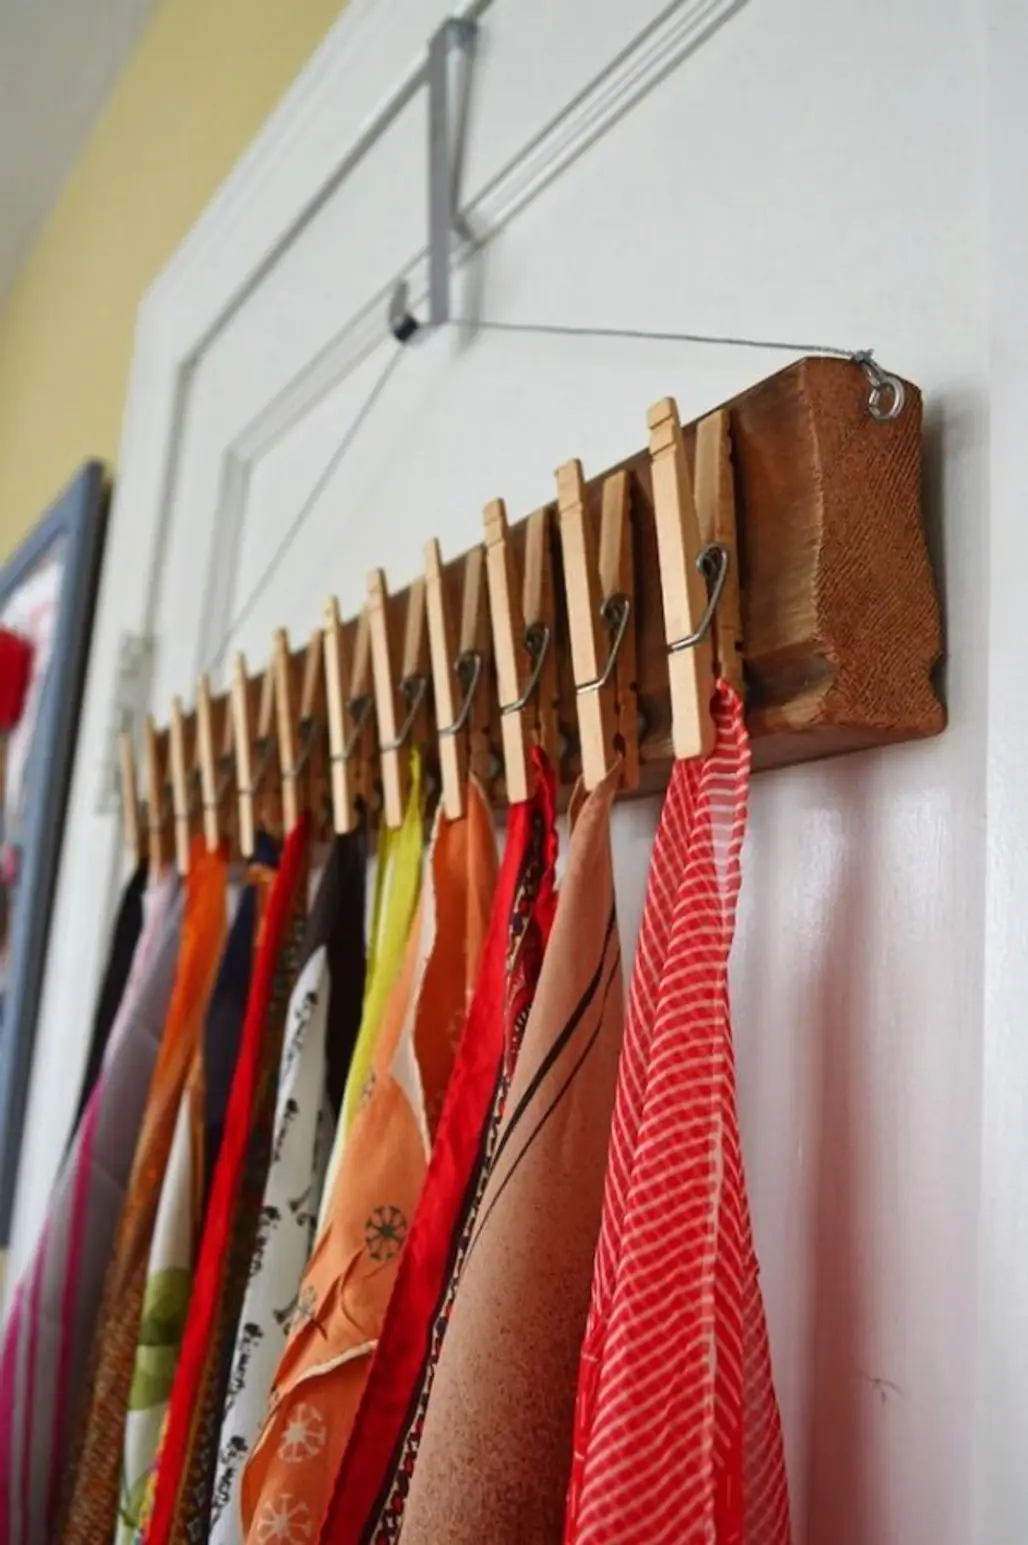 Hang Scarves by Clothespins to save Space